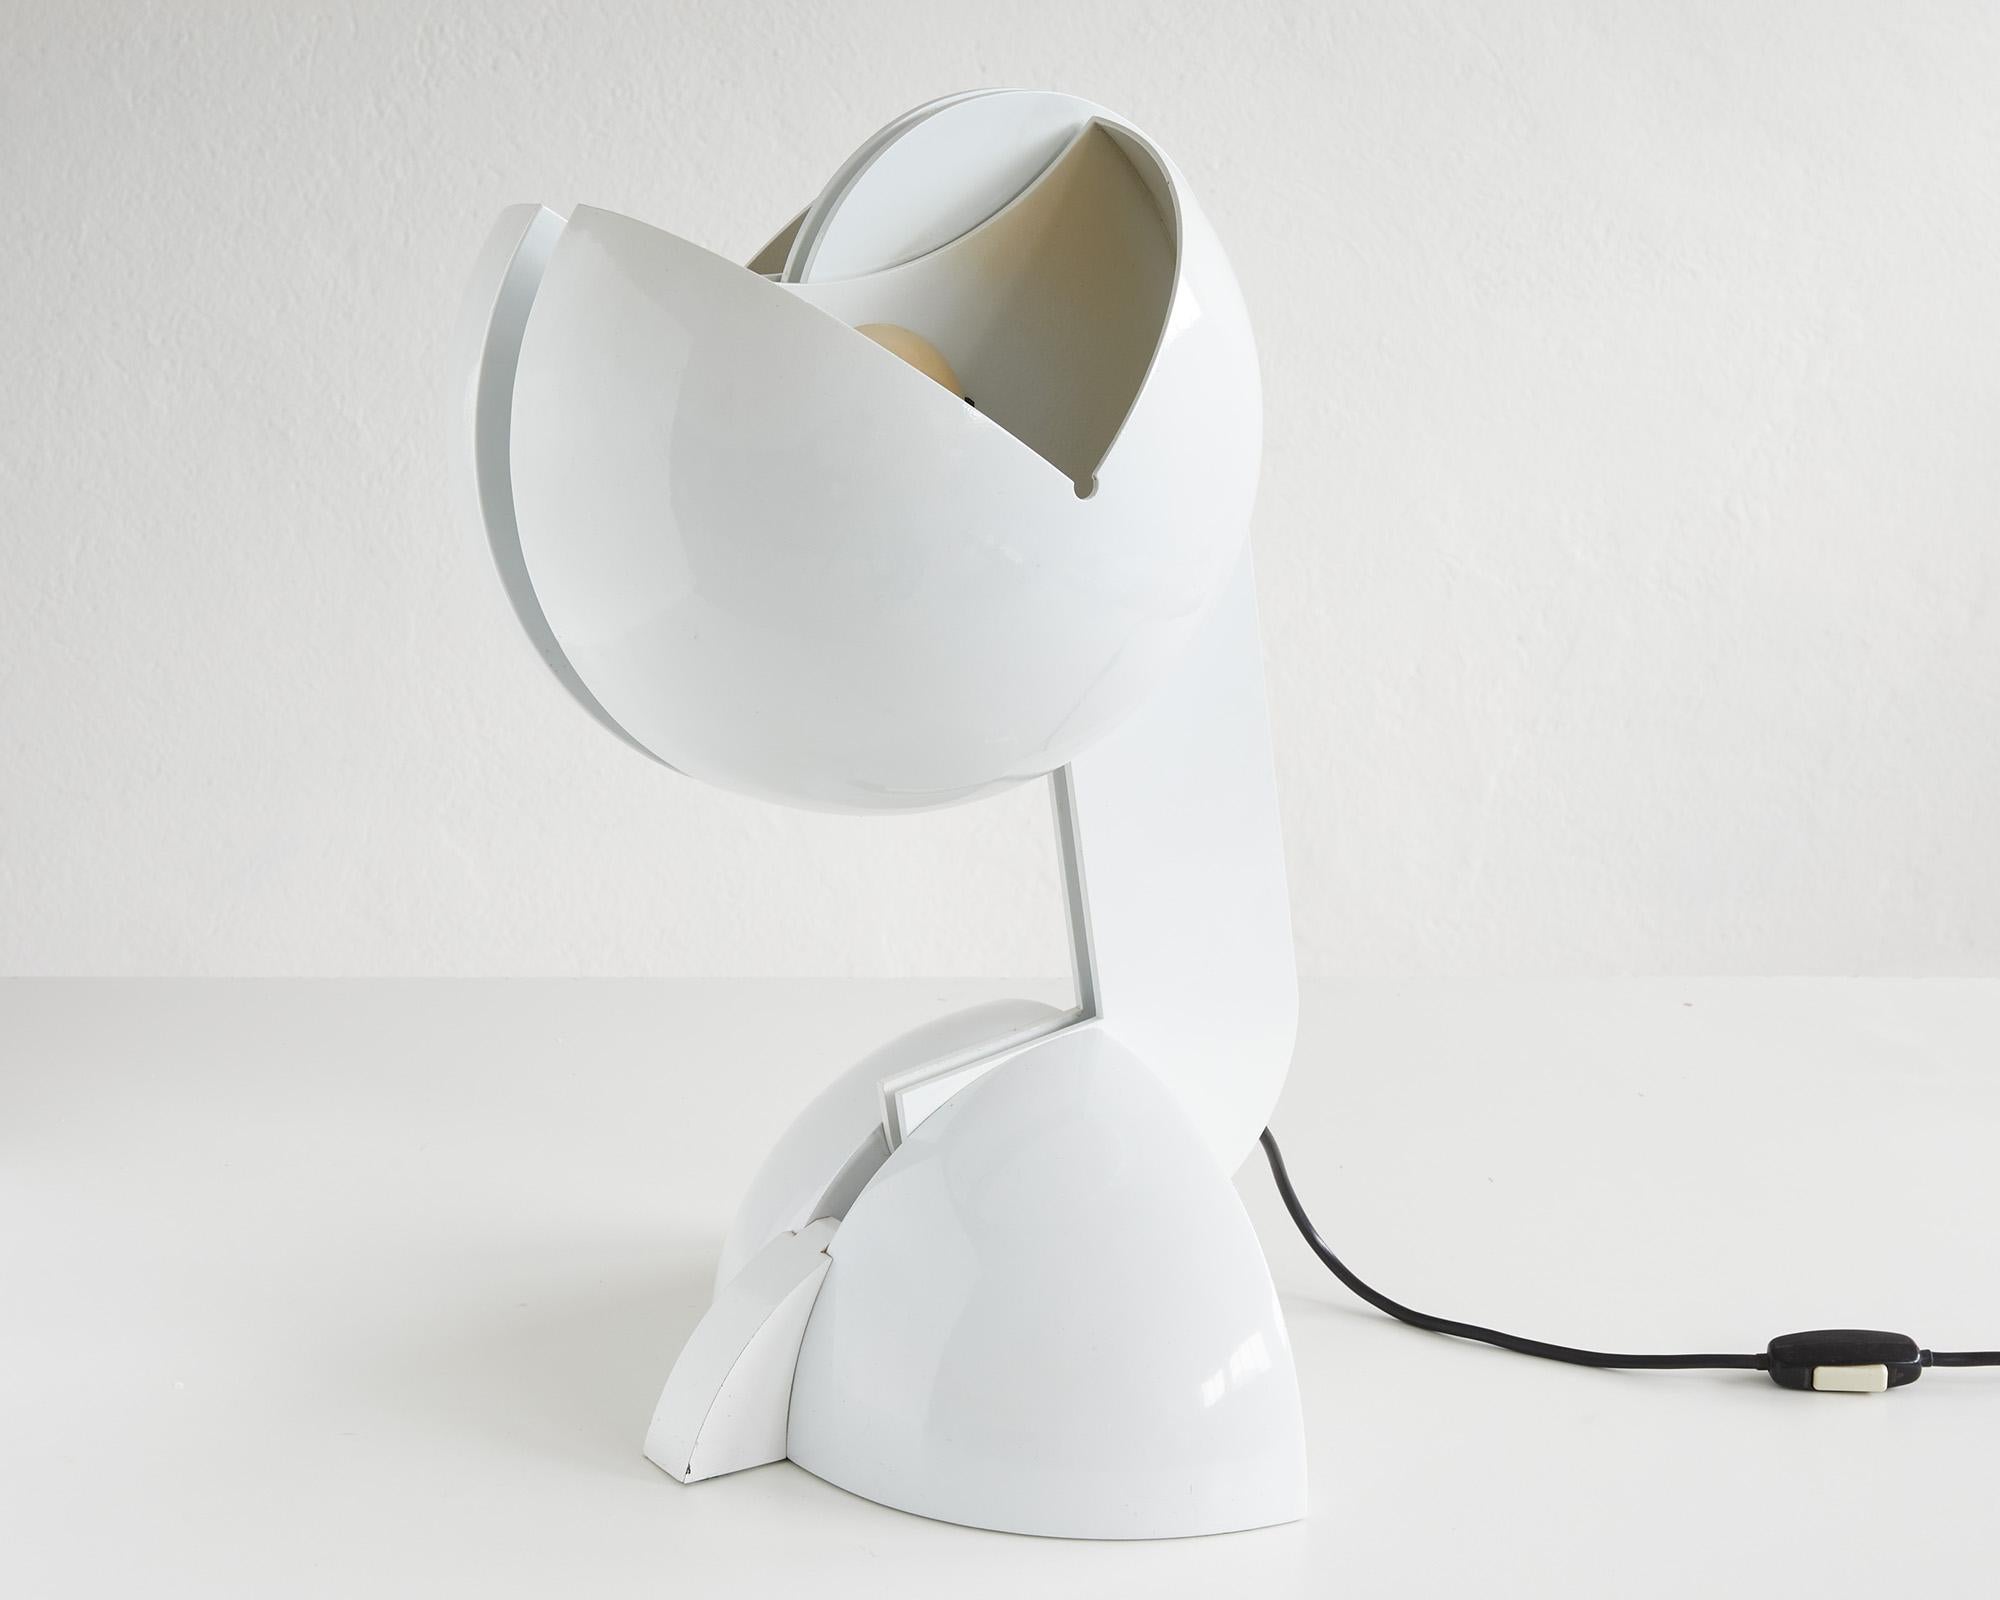 Italian Ruspa Sculptural Table Lamp by Gae Aulenti for Martinelli Luci, Italy, 1968